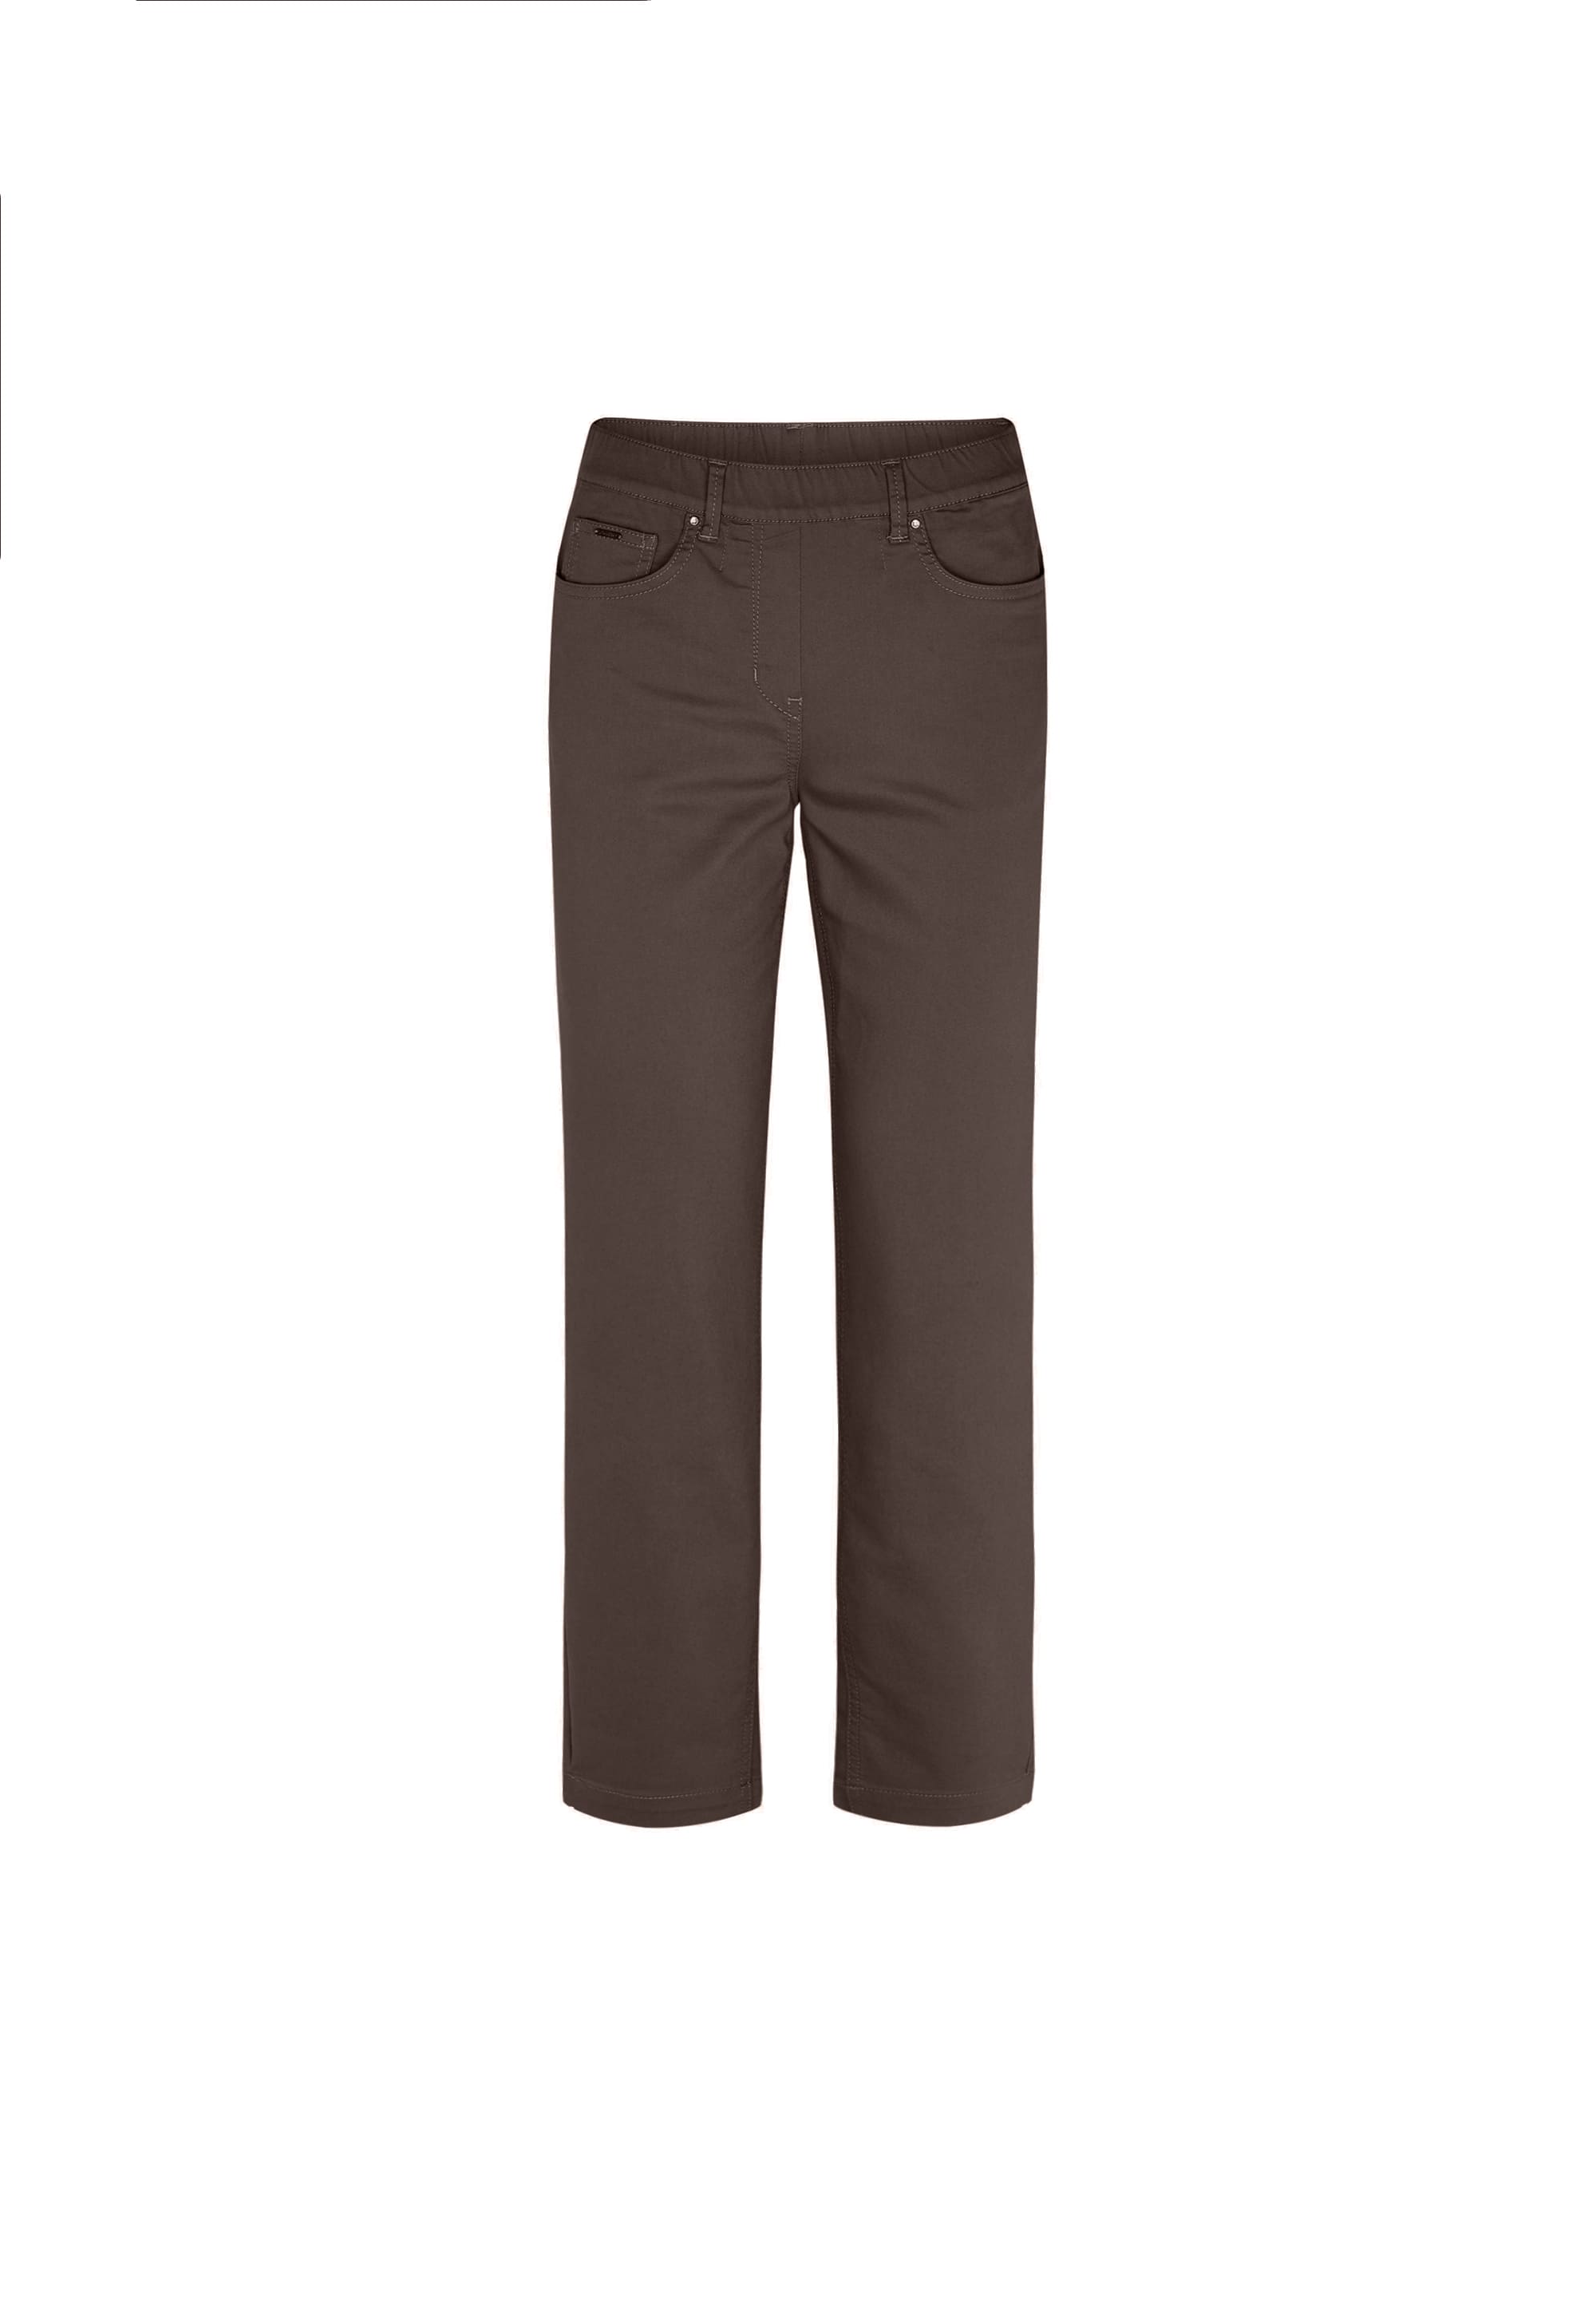 LAURIE Helen Straight - Medium Length Trousers STRAIGHT 88000 Brown